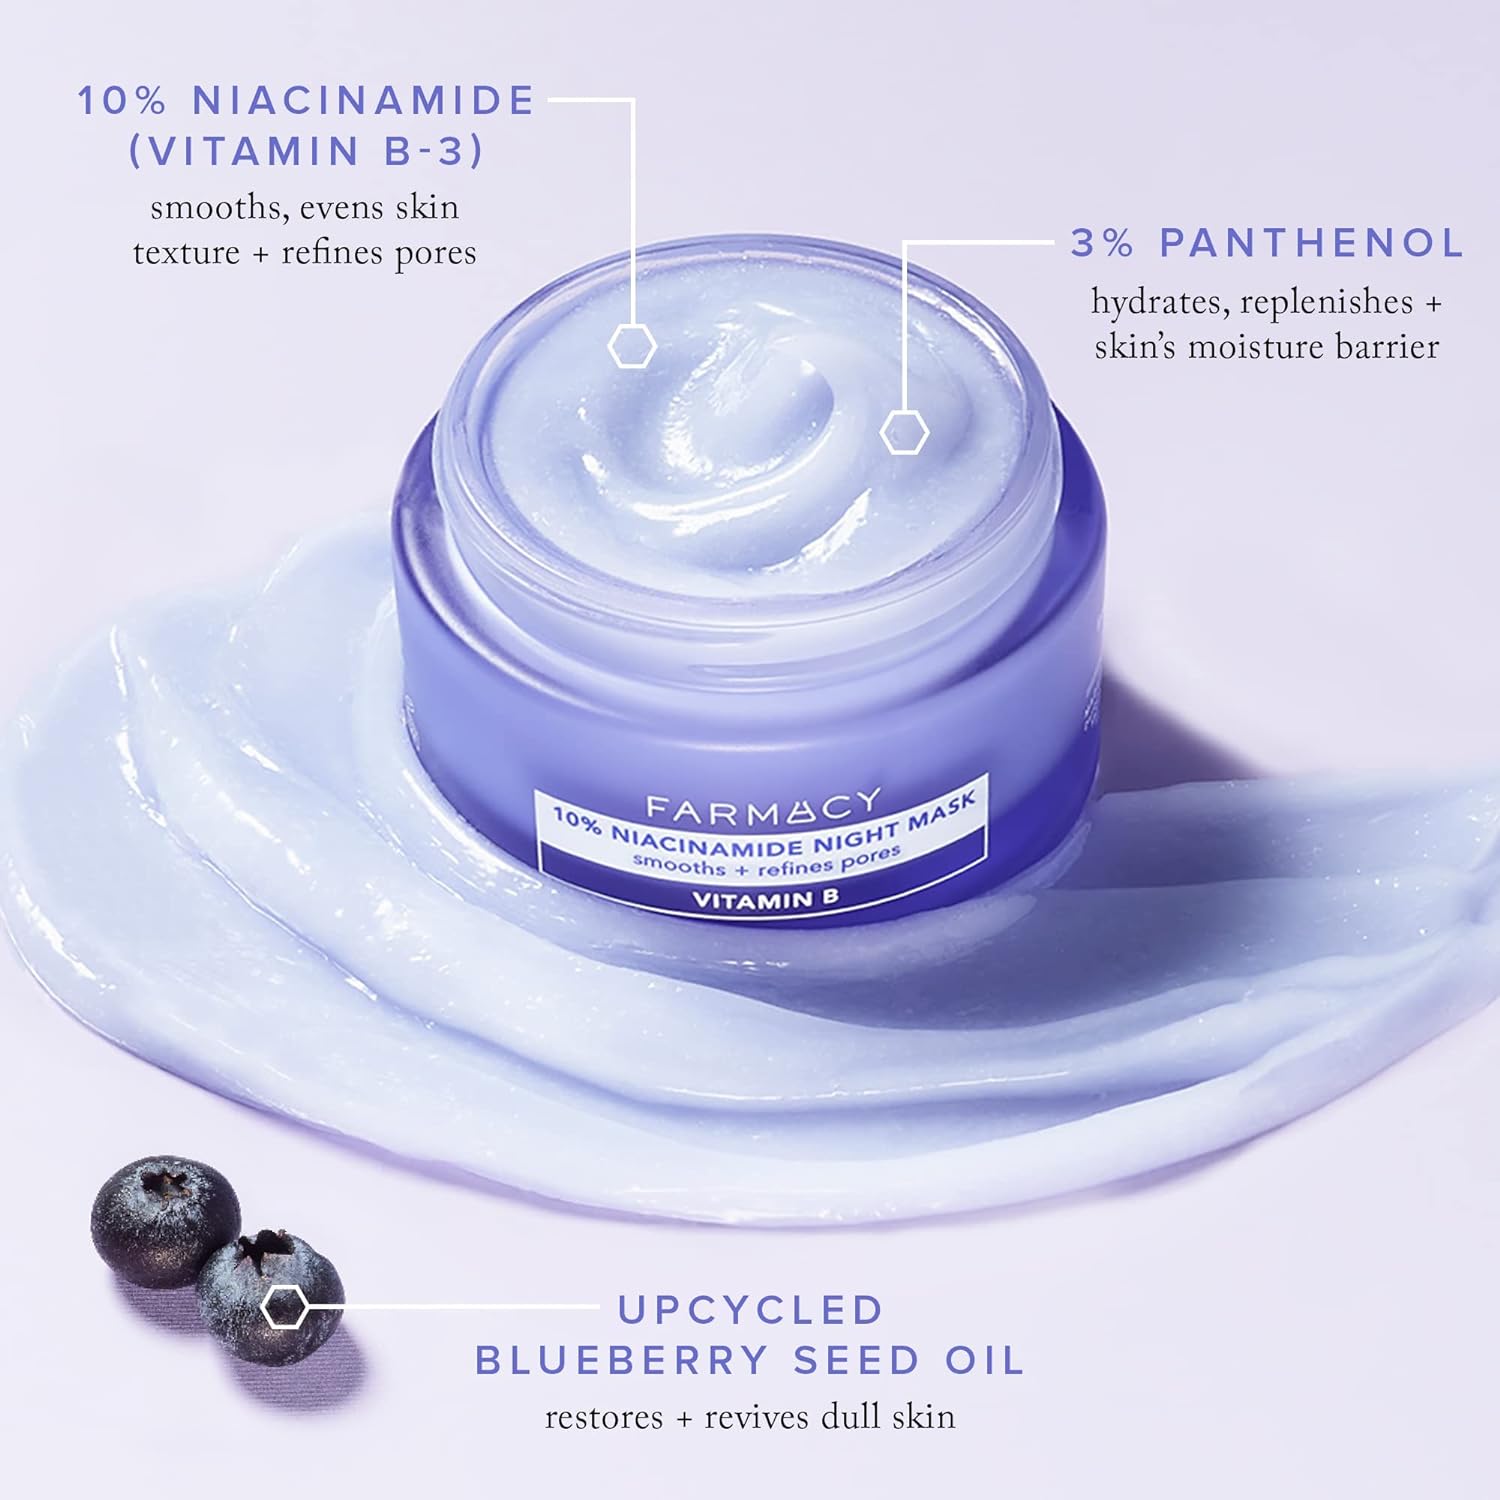 Farmacy 10% Niacinamide Facial Mask - Smoothing & Hydrating Skin Care Face Mask - Panthenol & Niacinamide Cream - Overnight Face Mask, 25 ml : Beauty & Personal Care